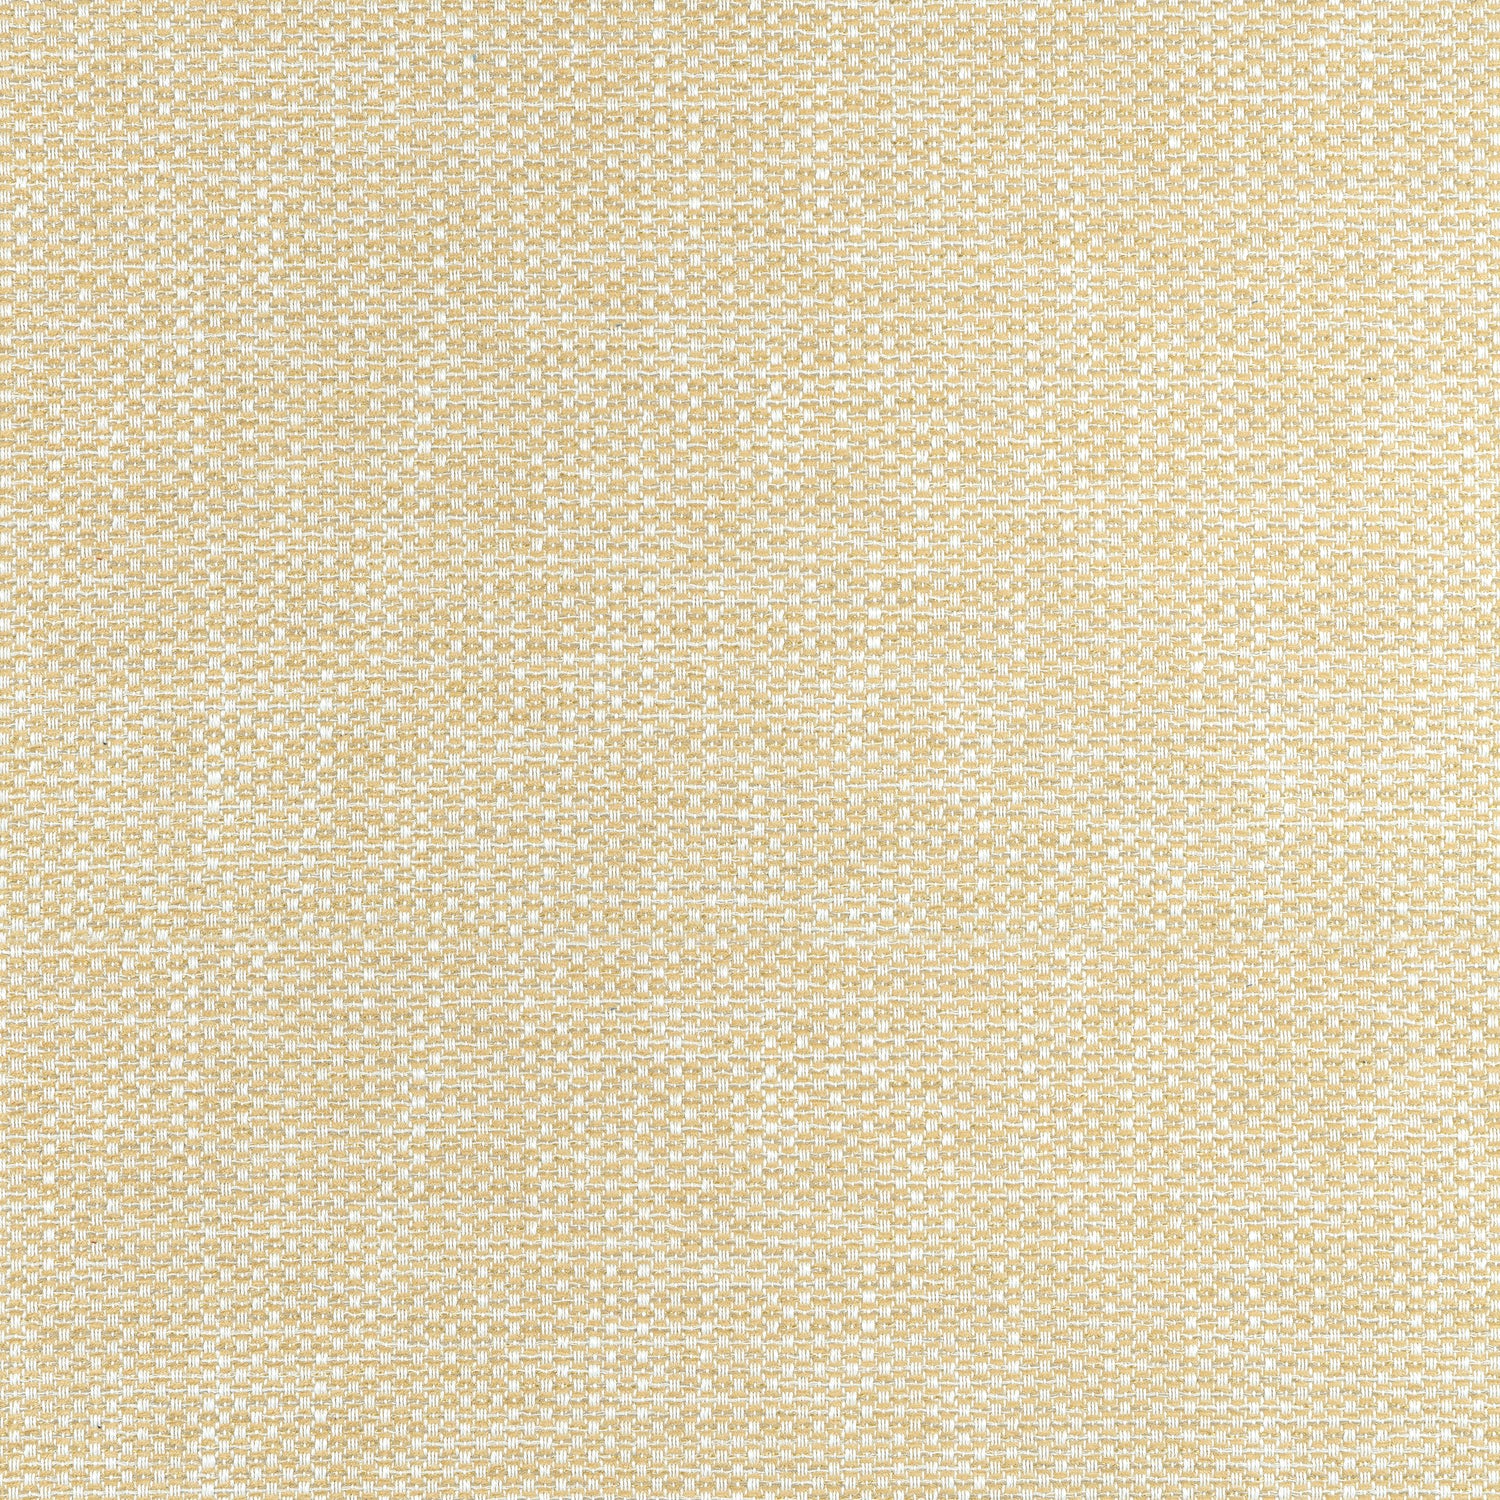 Cascade fabric in straw color - pattern number W75262 - by Thibaut in the Elements collection